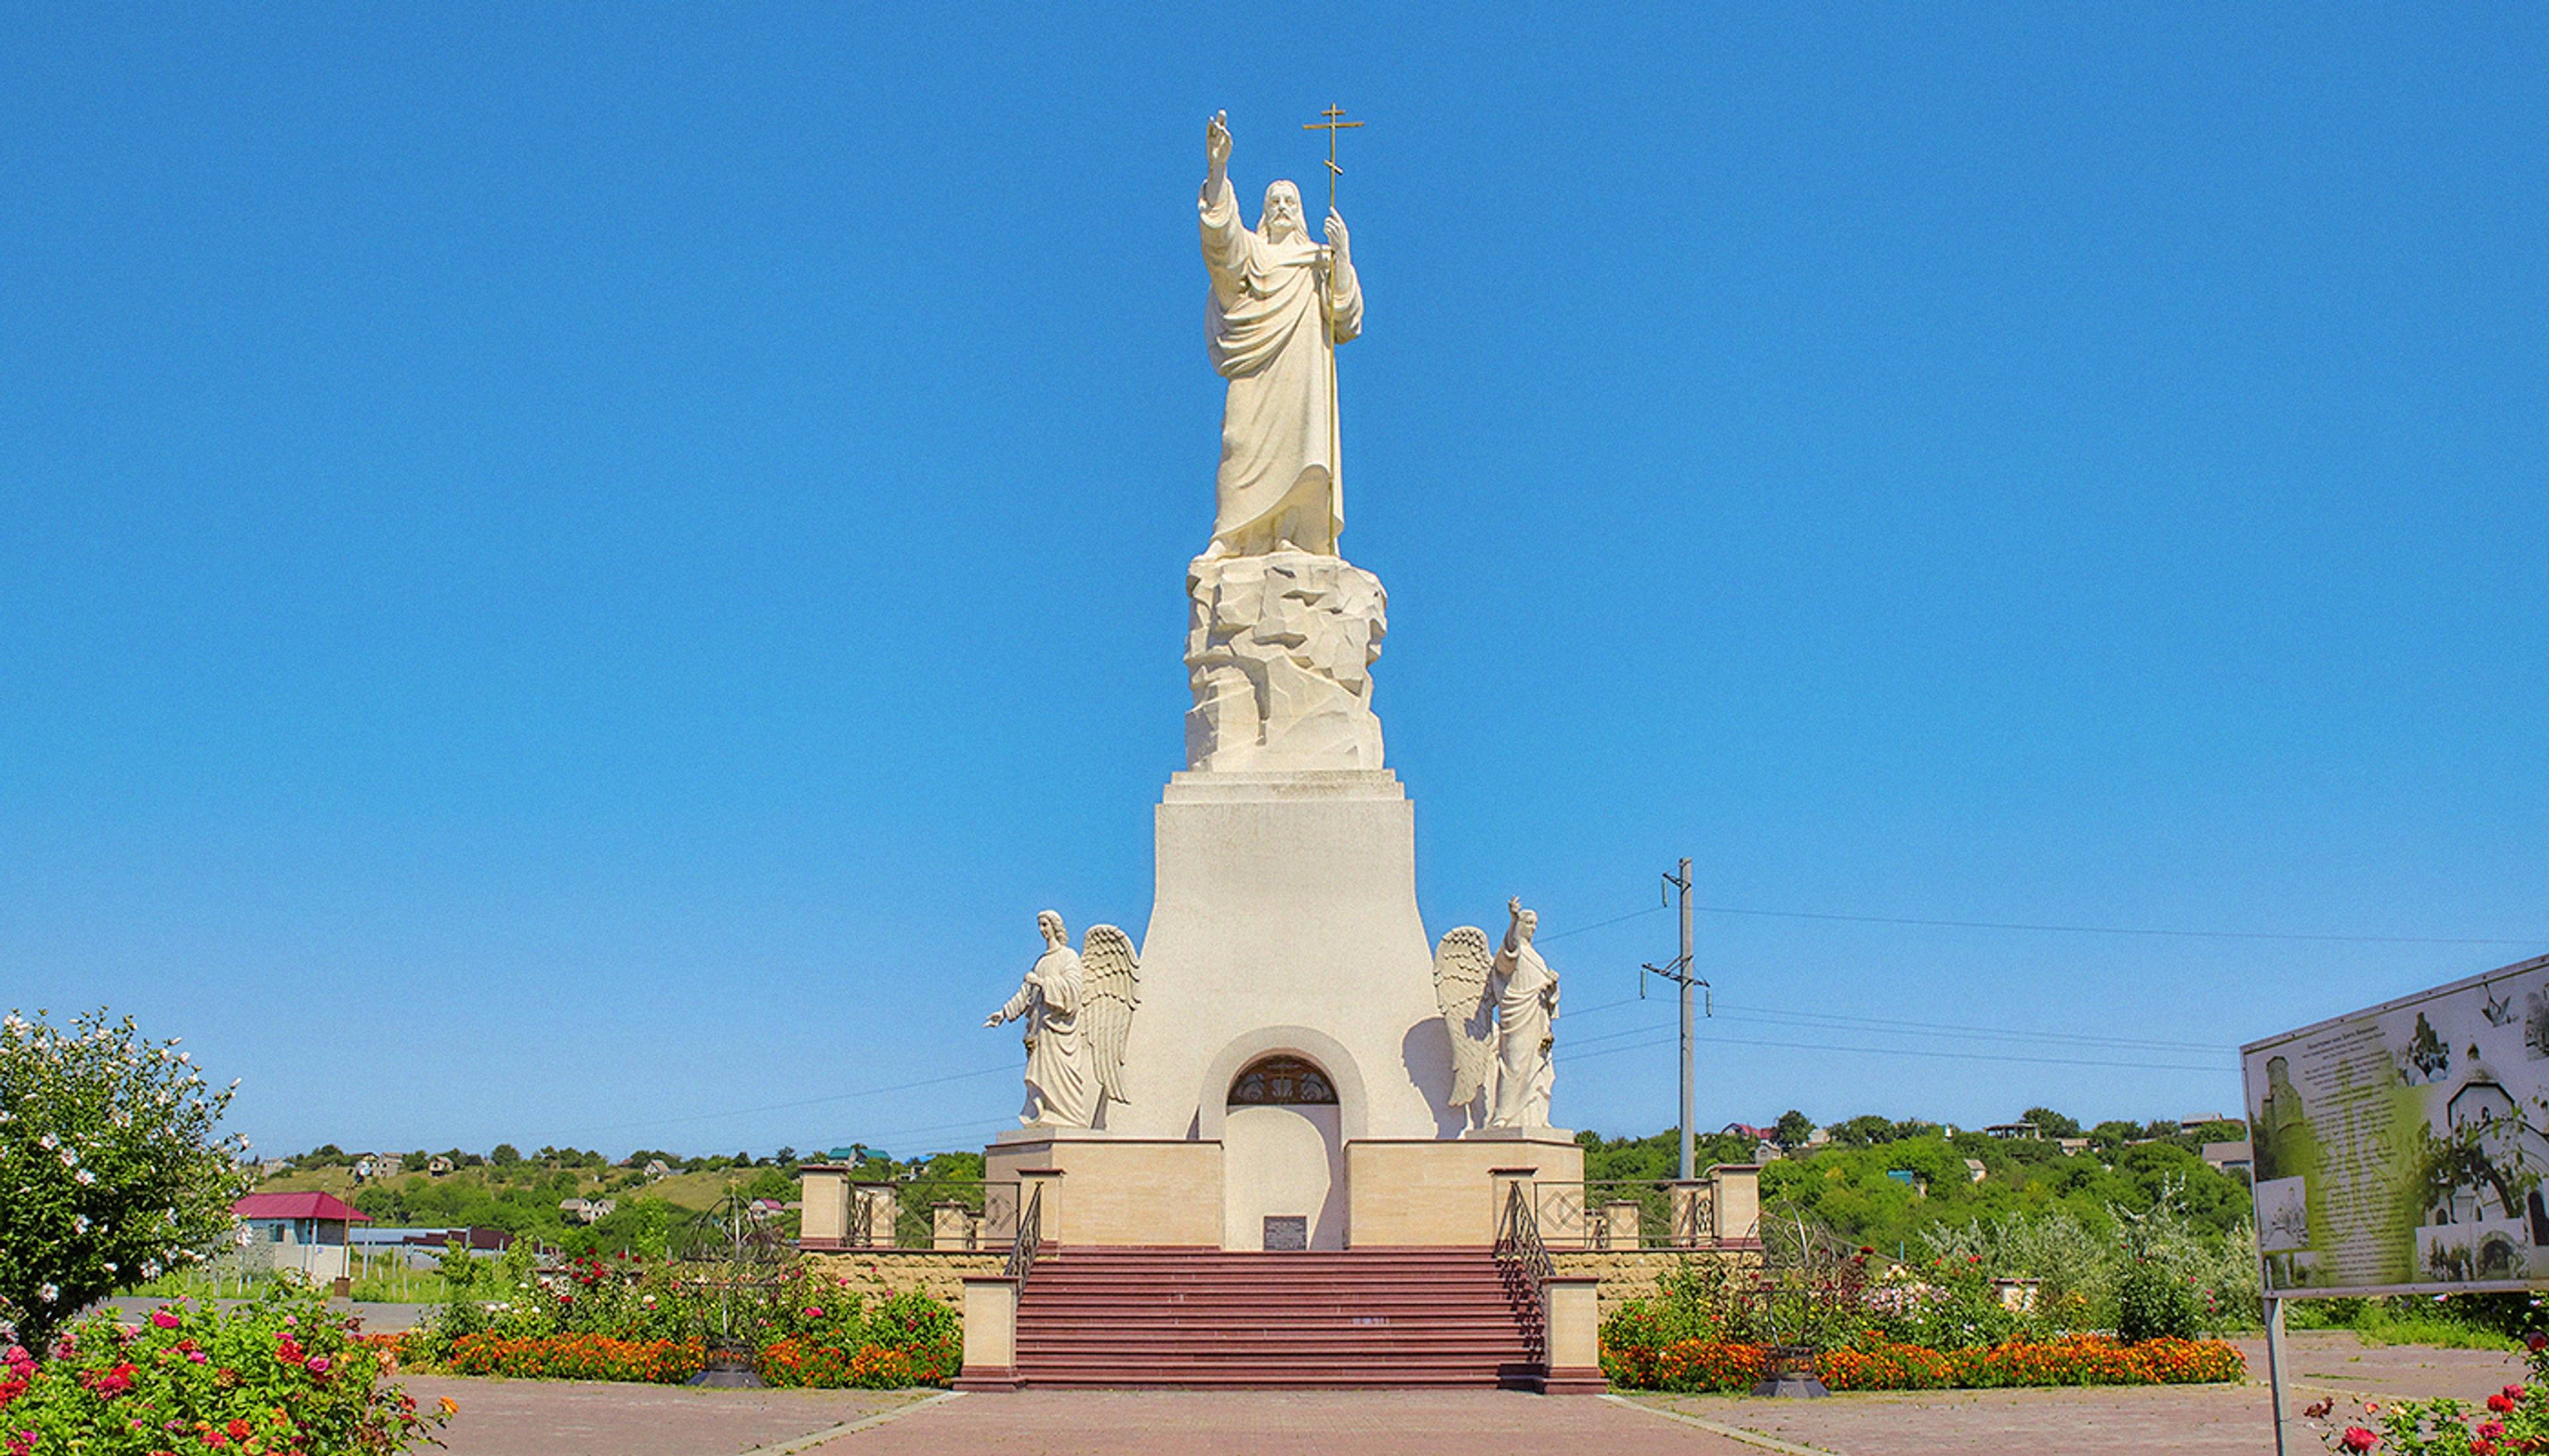 Statue of Christ the Risen One